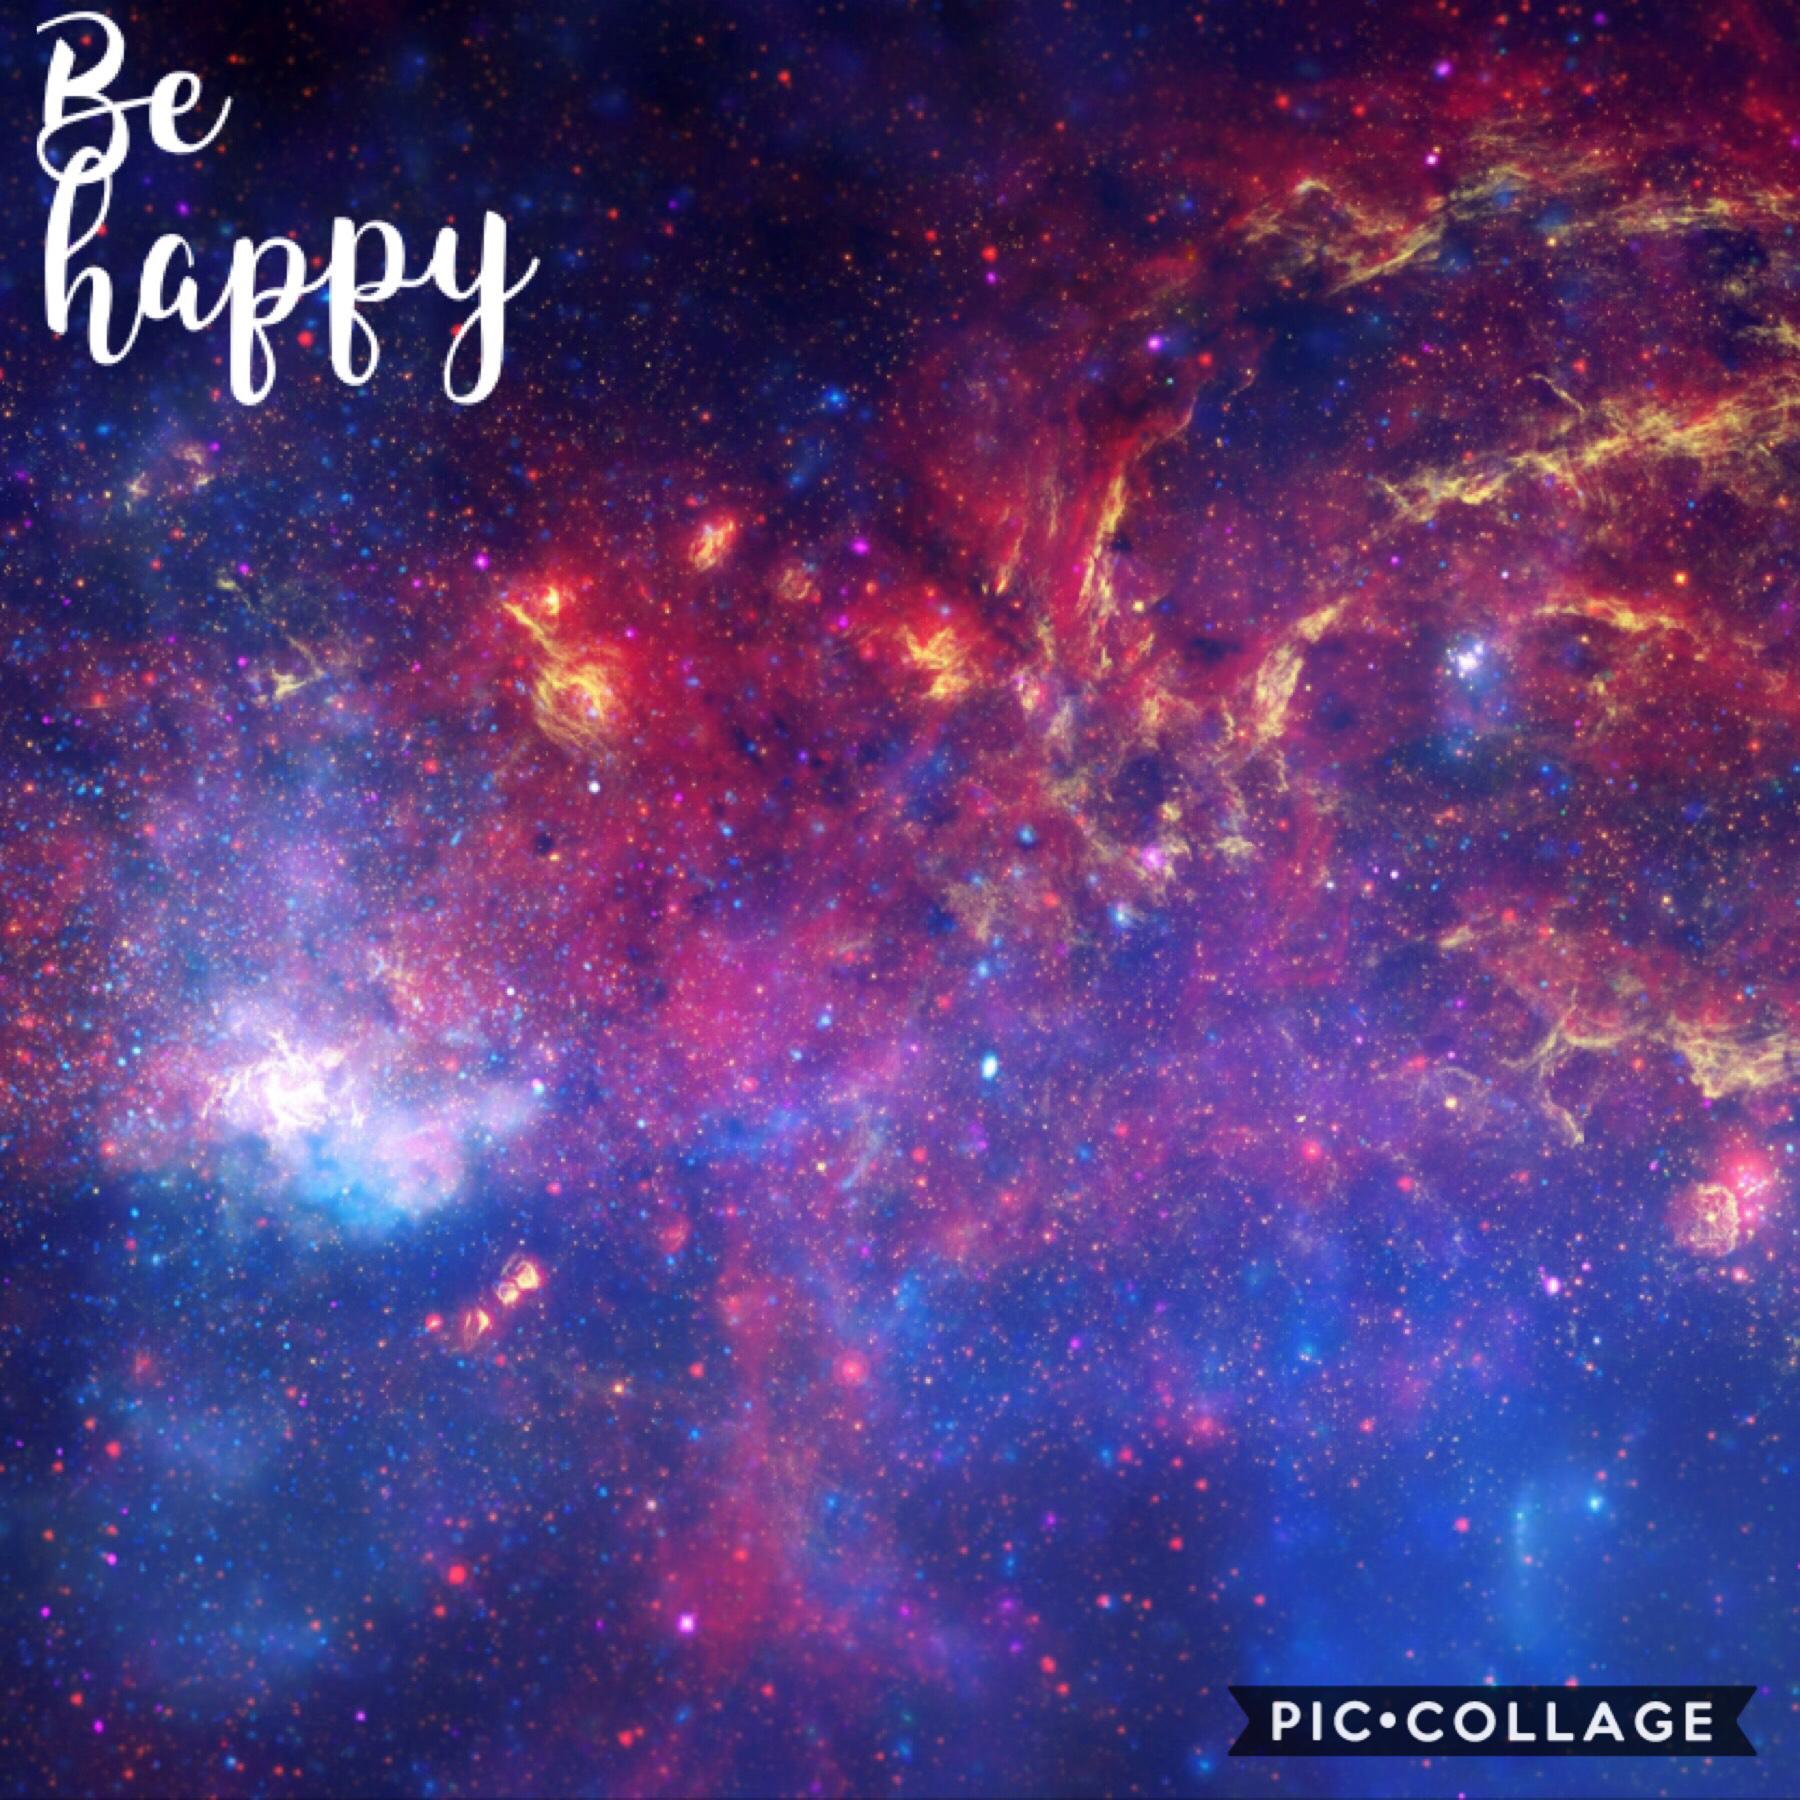 Be happy!! You are 😉 